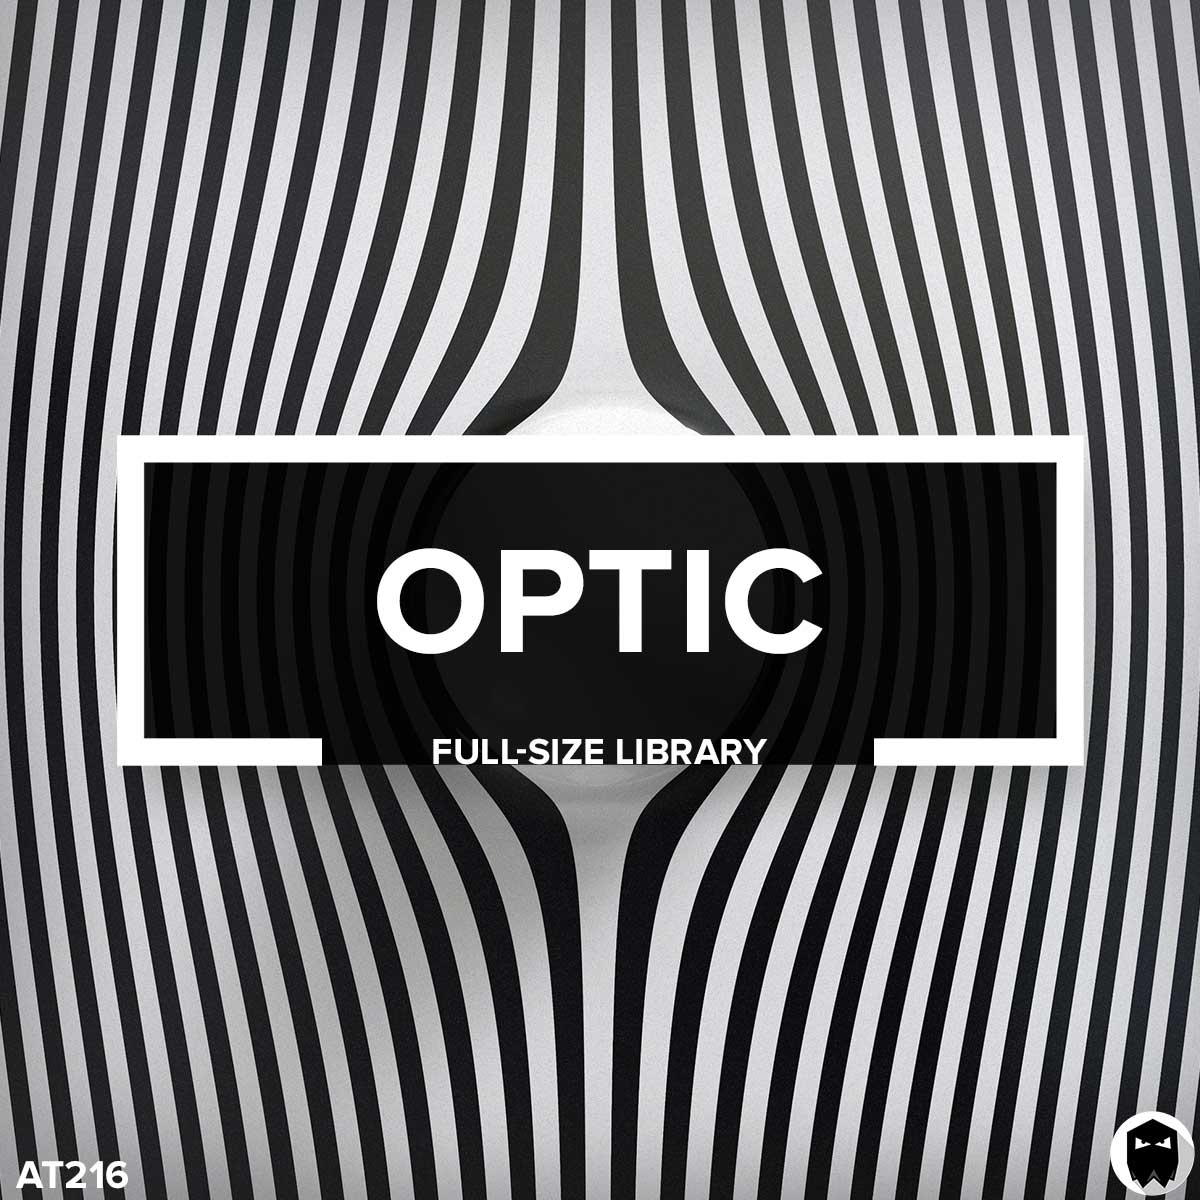 Optic // Full-Size Library